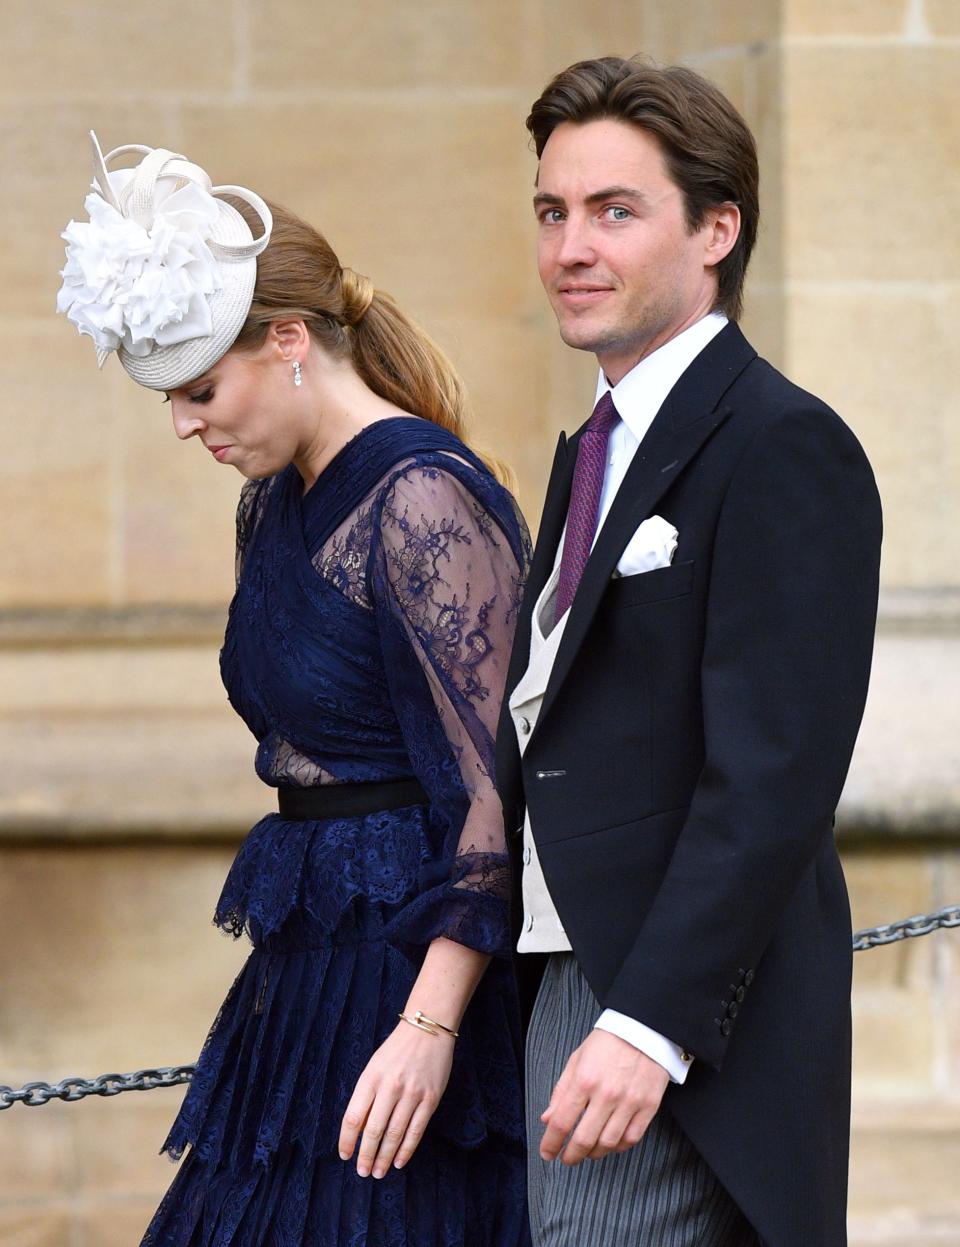 See Princess Beatrice's Gorgeous Engagement Photos, Which Were Taken by Princess Eugenie